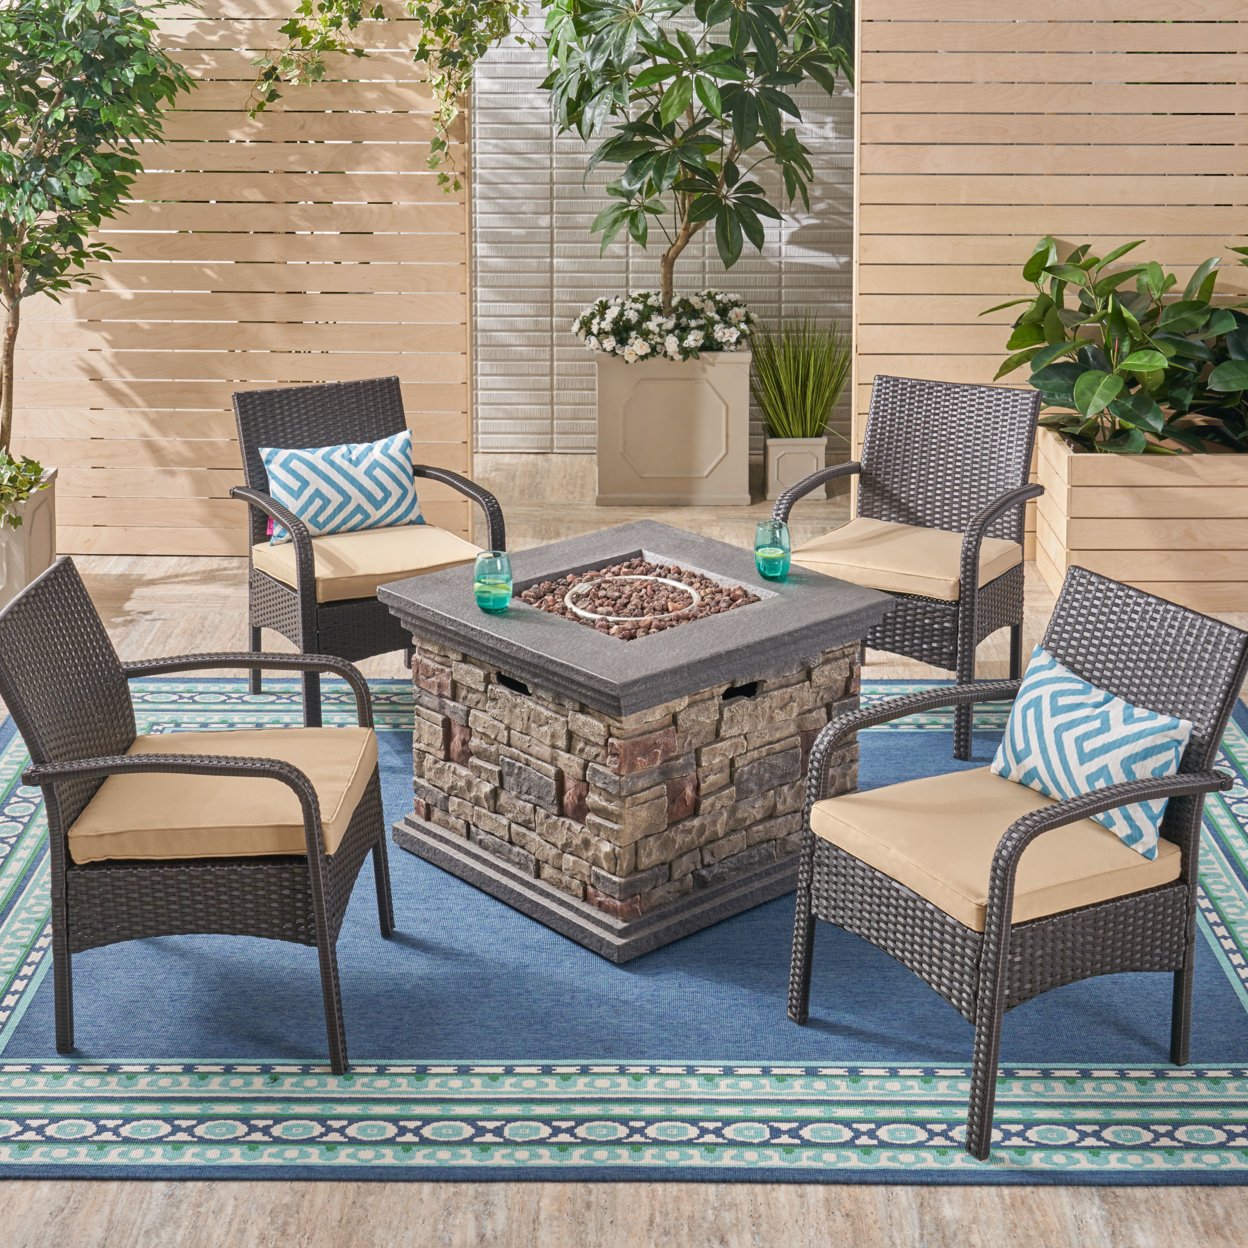 Meroy Patio Fire Pit Set, 4-Seater With Club Chairs, Wicker With Outdoor Cushions - Brown / Tan / Brown